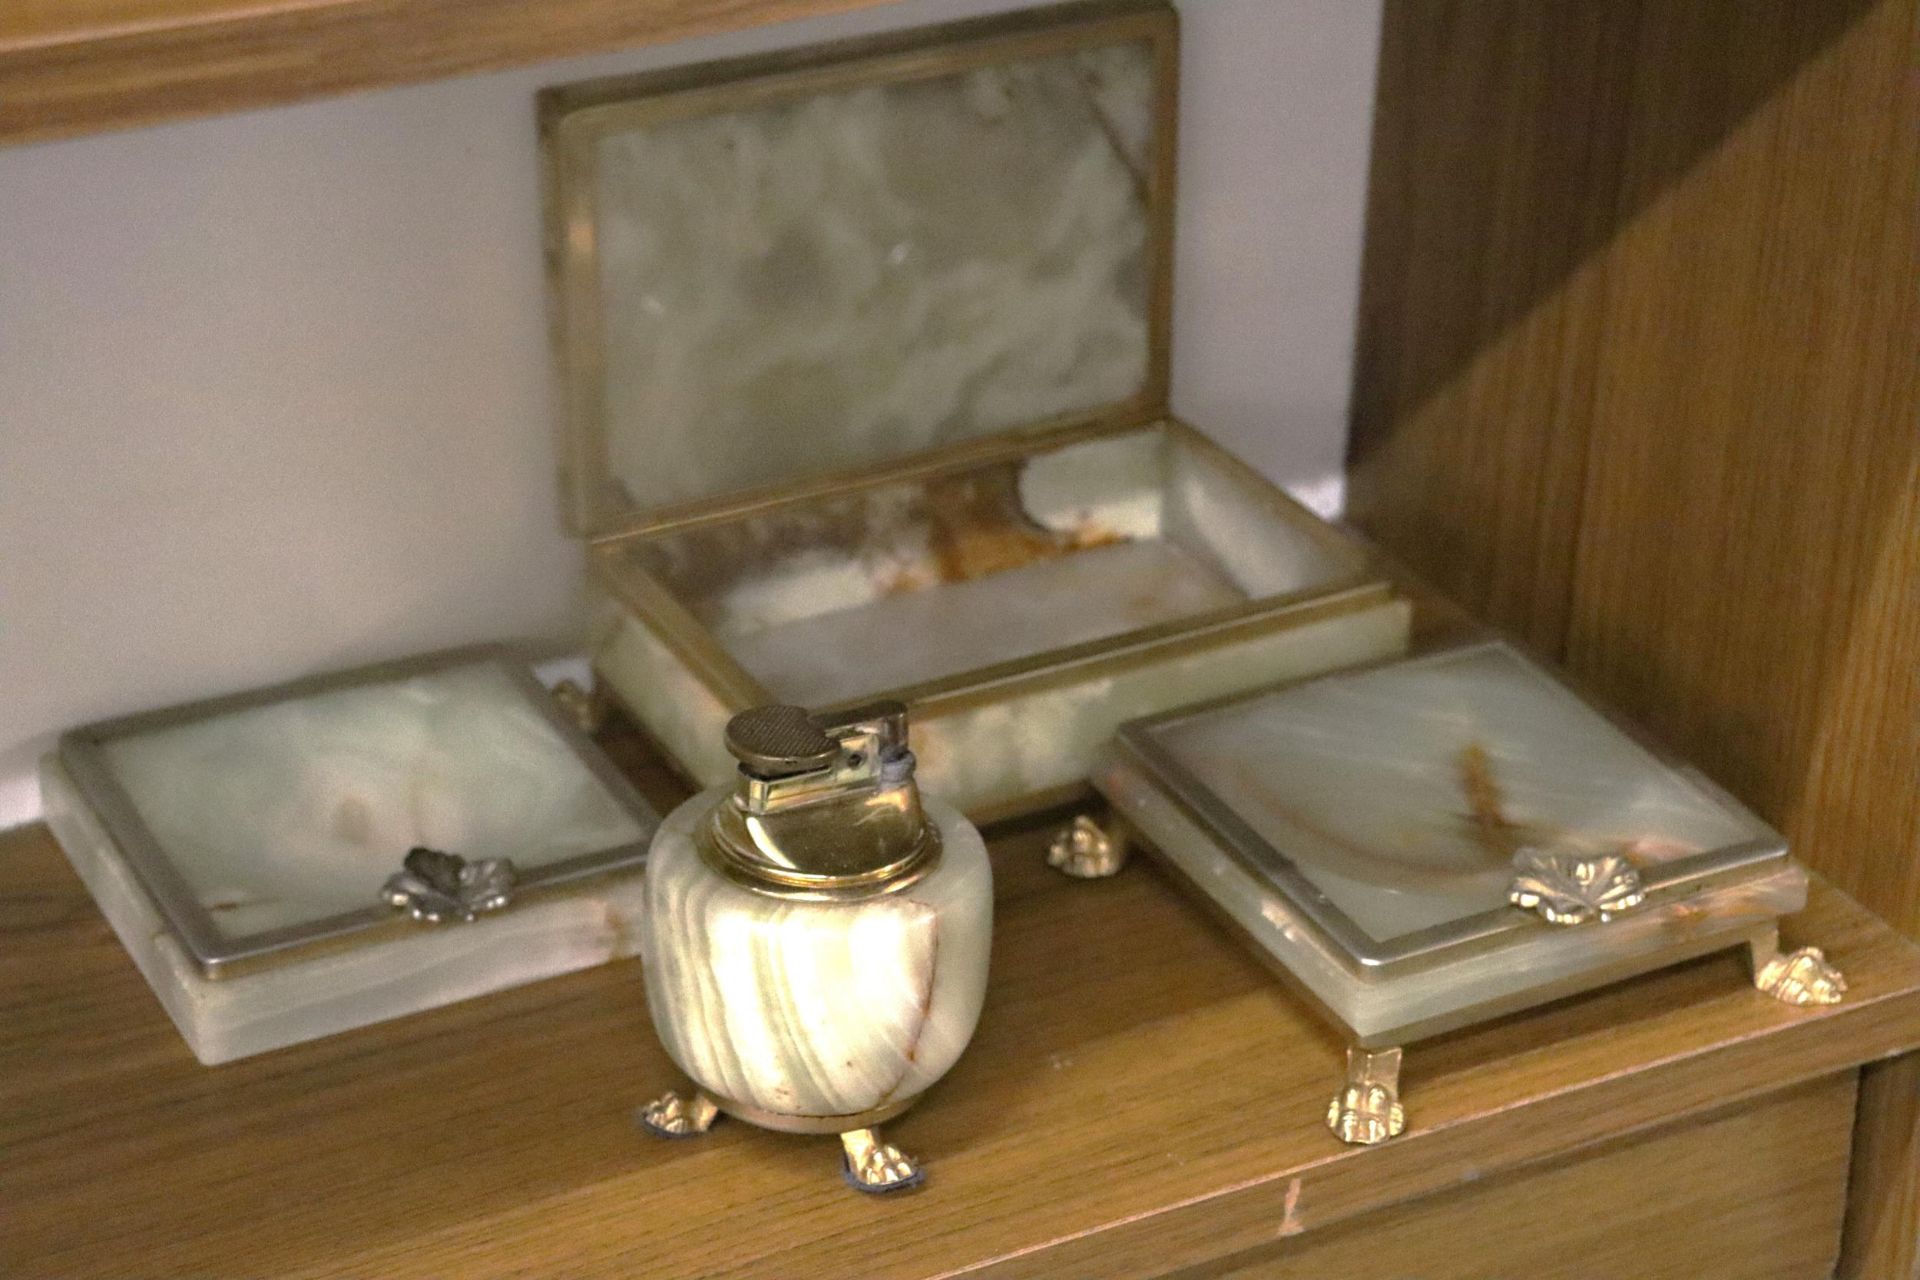 A QUANTITY OF ONYX ITEMS TO INCLUDE A FOOTED BOX, ASHTRAYS AND A TABLE LIGHTER - 4 IN TOTAL